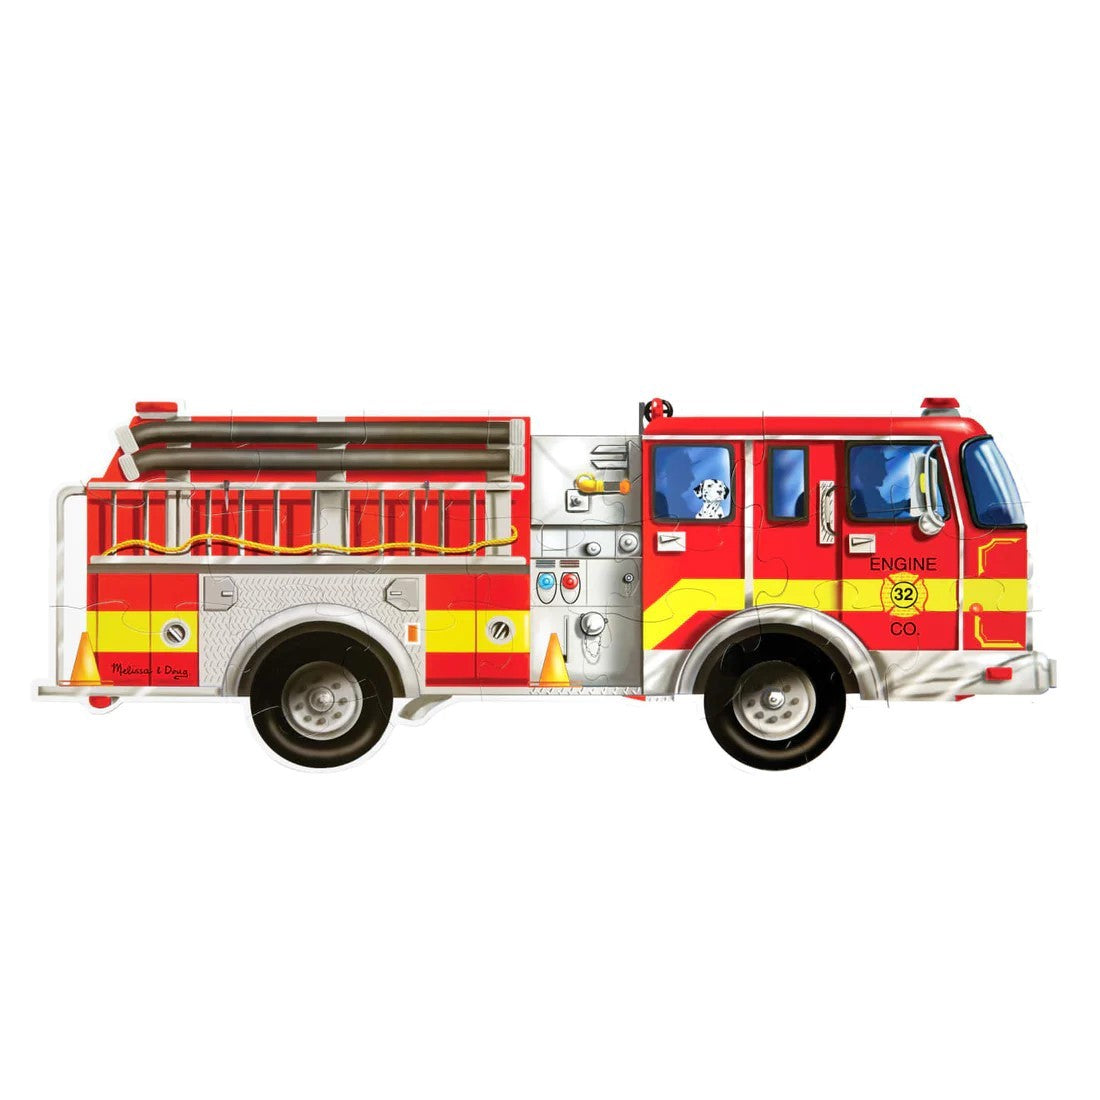 View Giant Fire Engine Floor Jigsaw by Melissa and Doug information